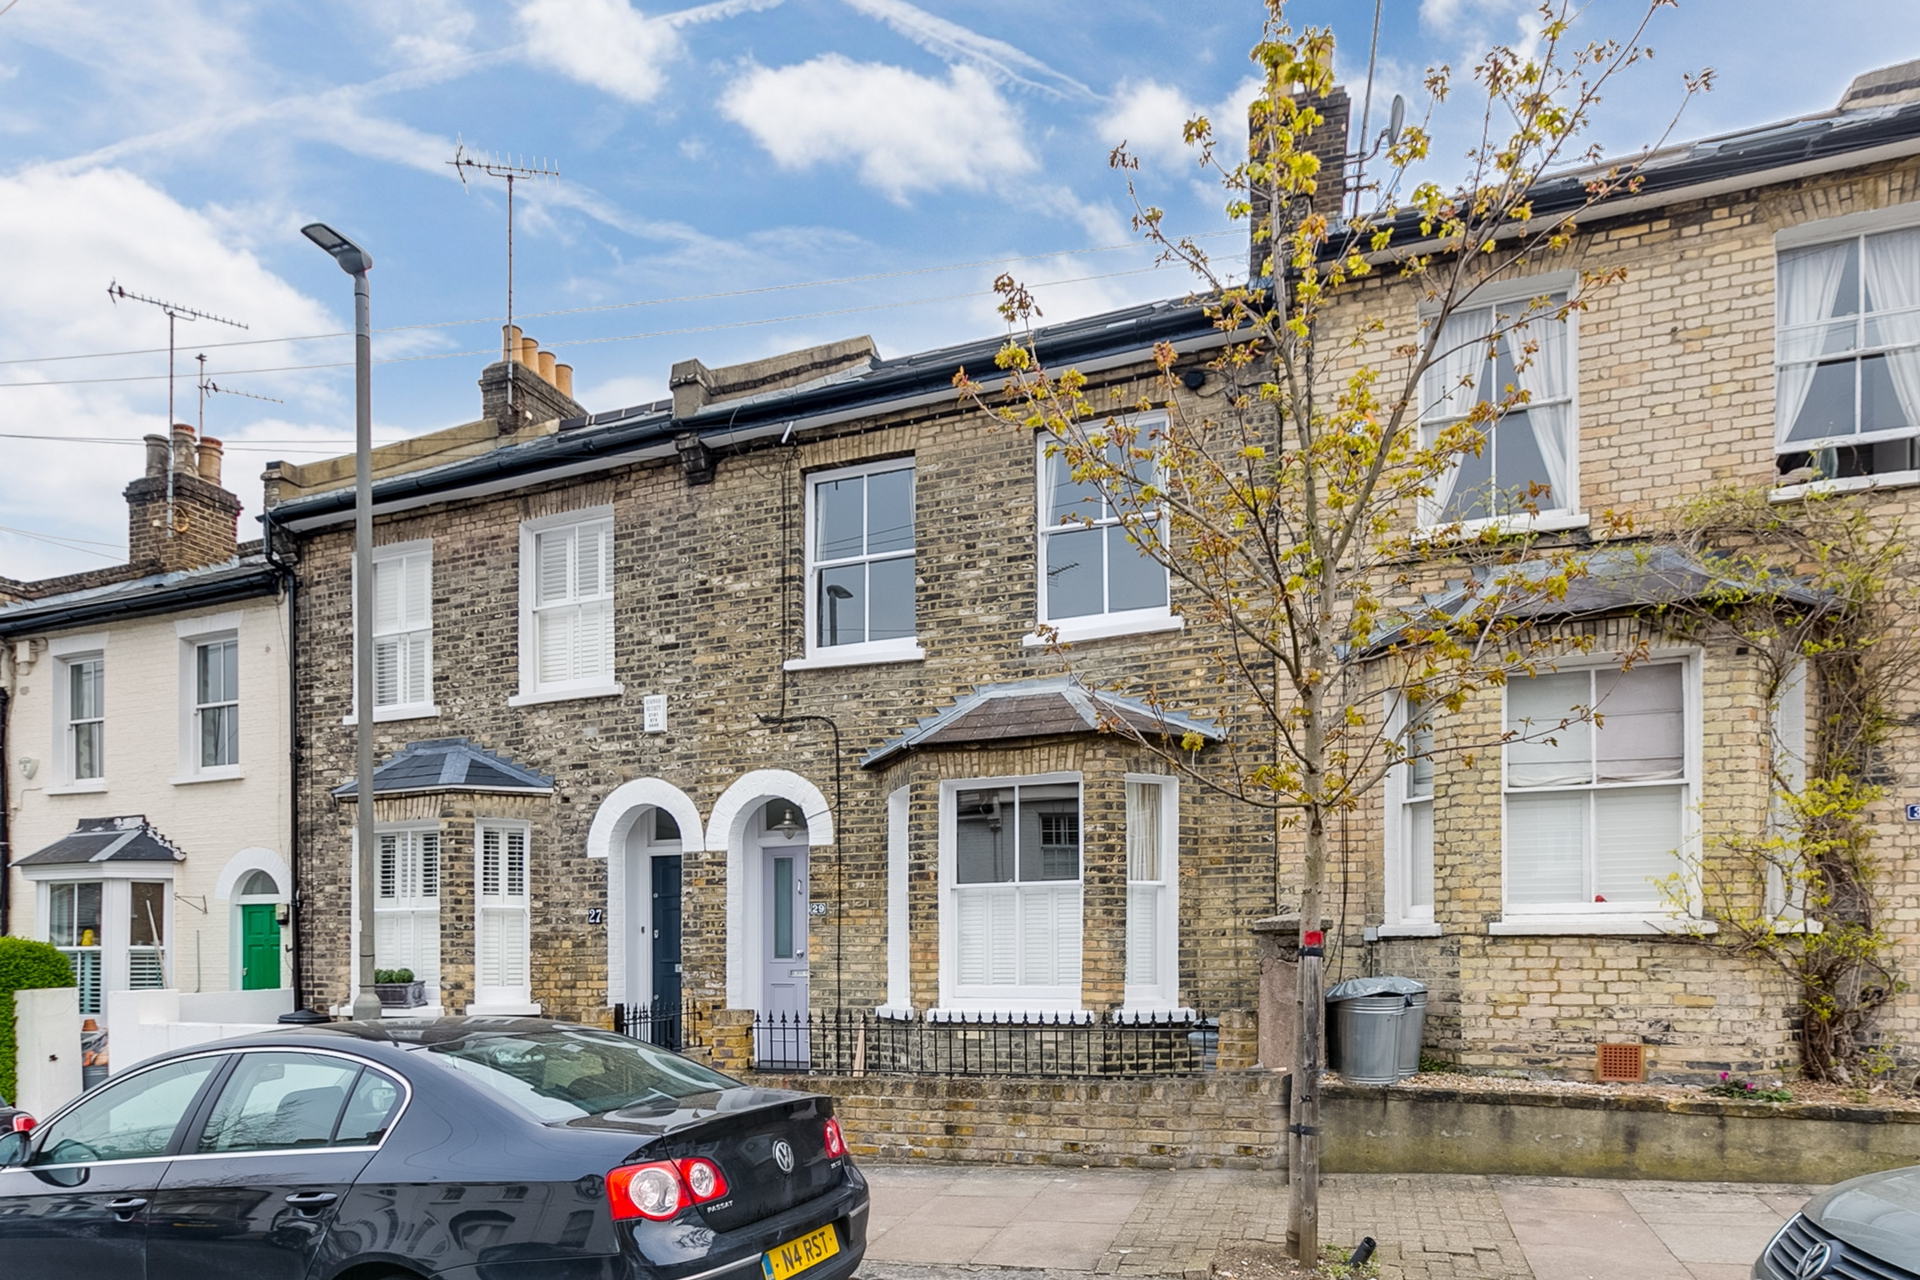 3 Bedroom House to rent in Wandsworth, London, SW18